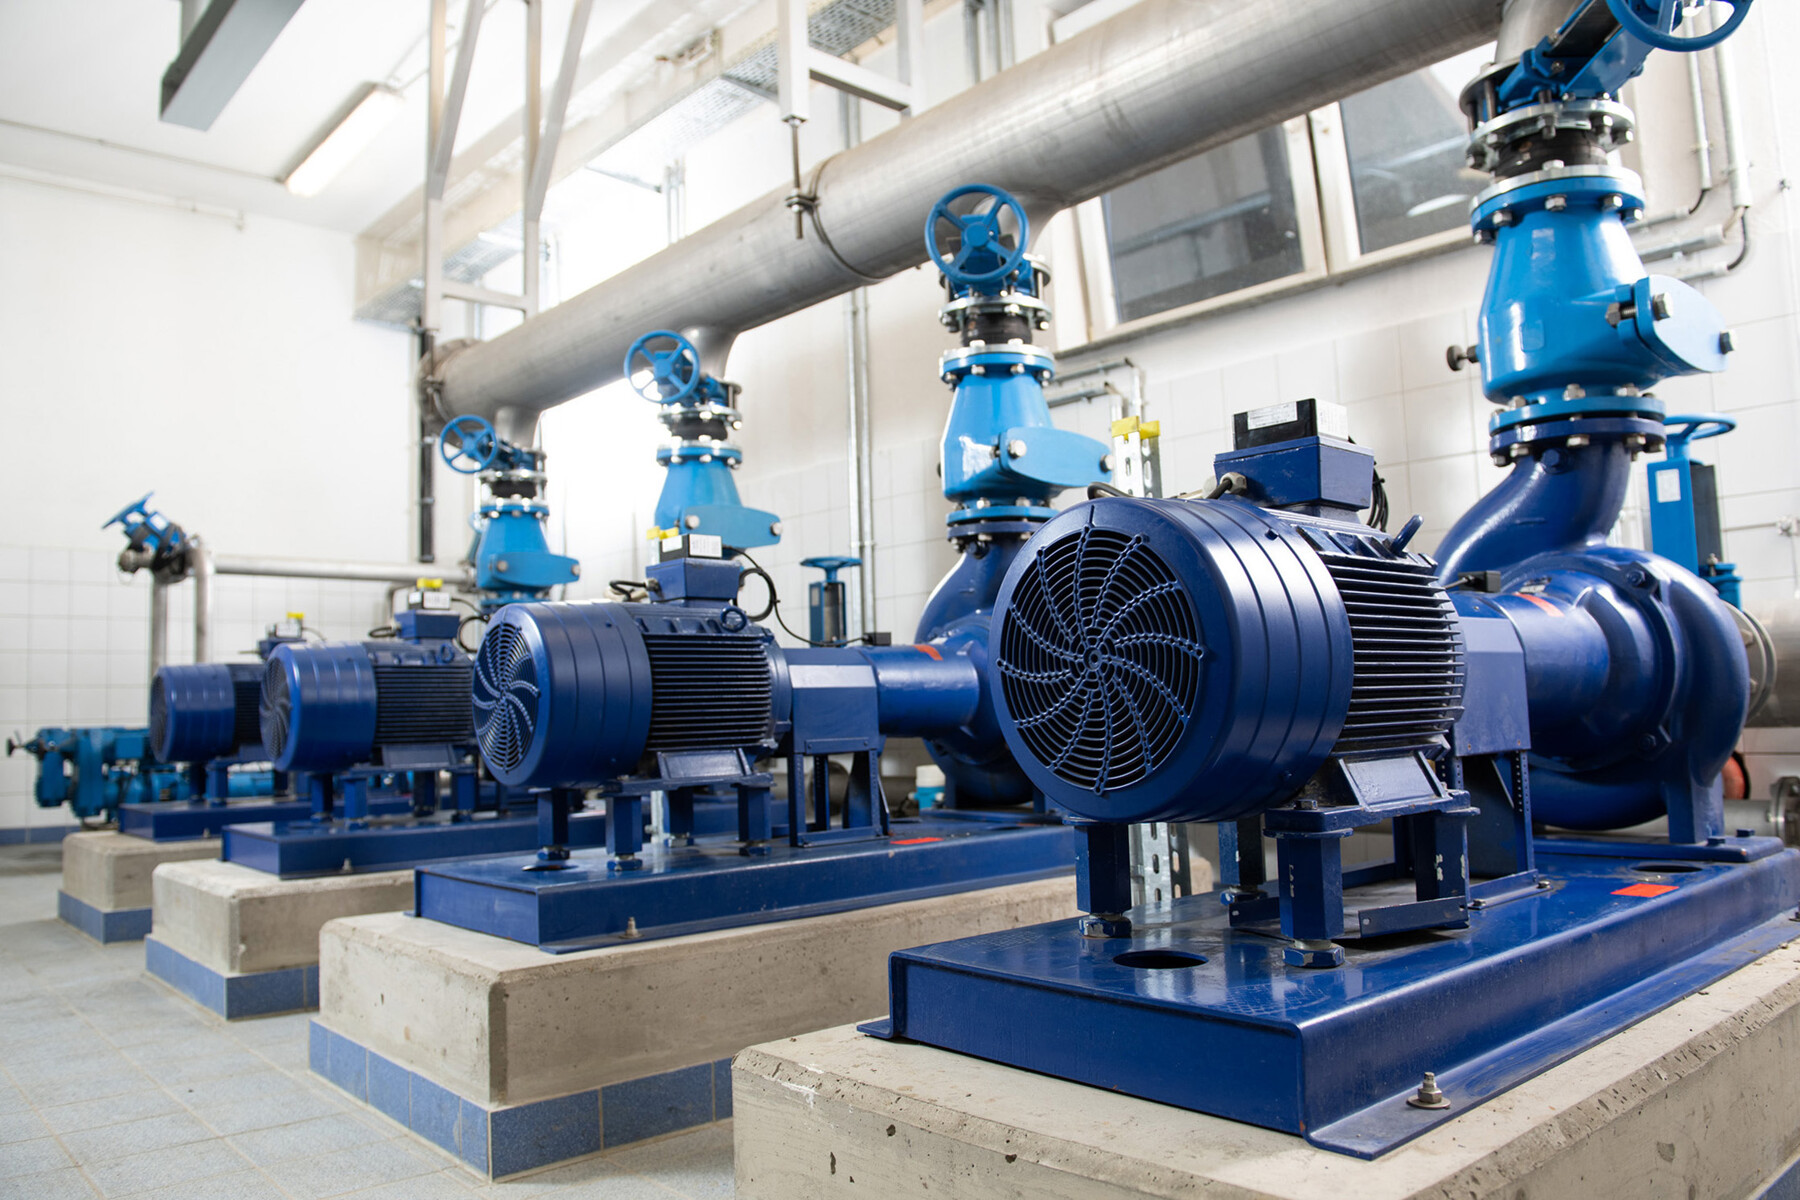 System incorporating piping, pumps and valves